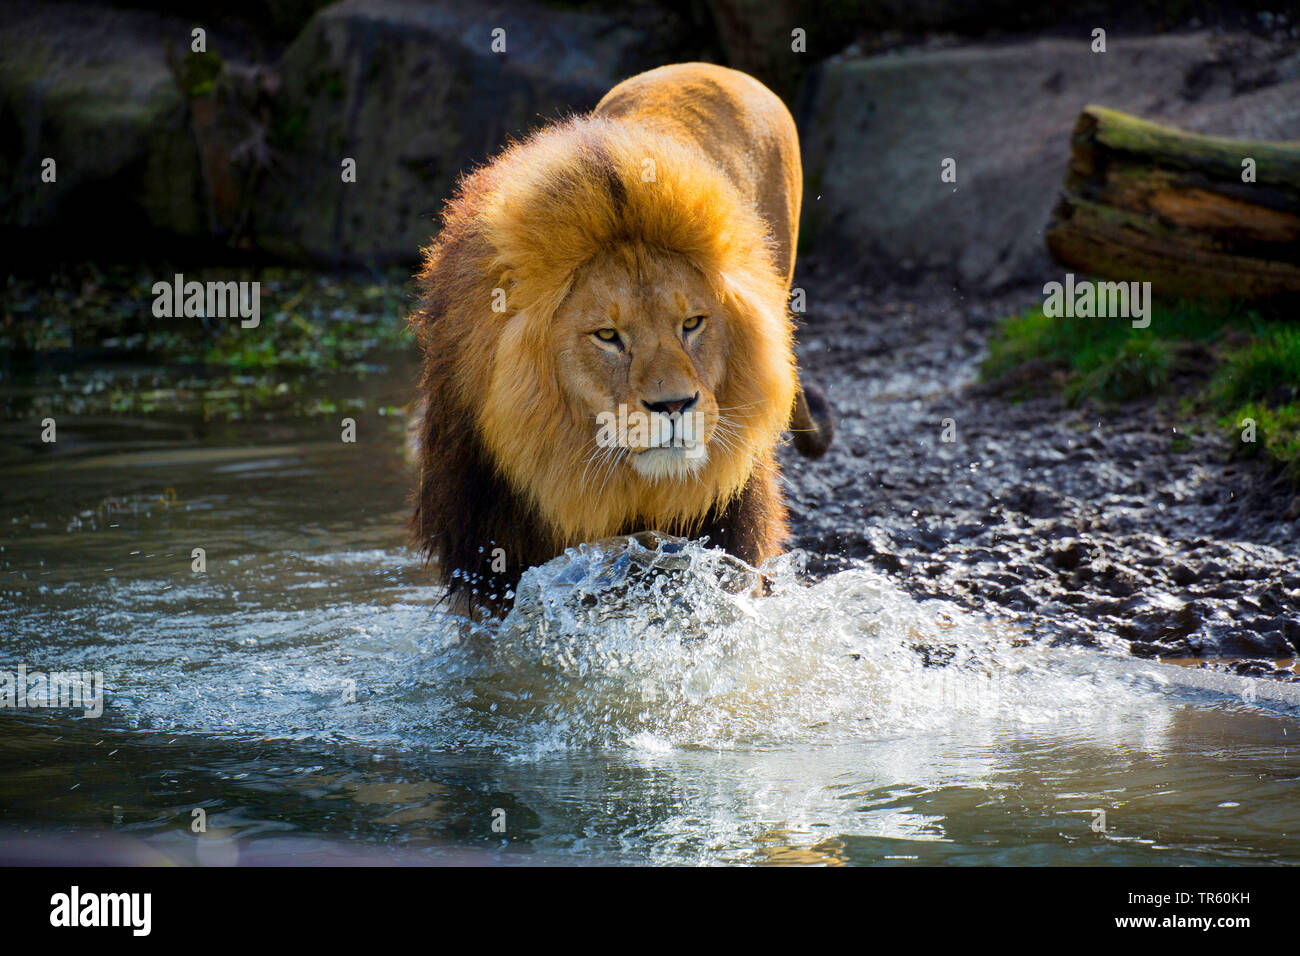 lion (Panthera leo), male lion walking through shallow water, front view, Africa Stock Photo